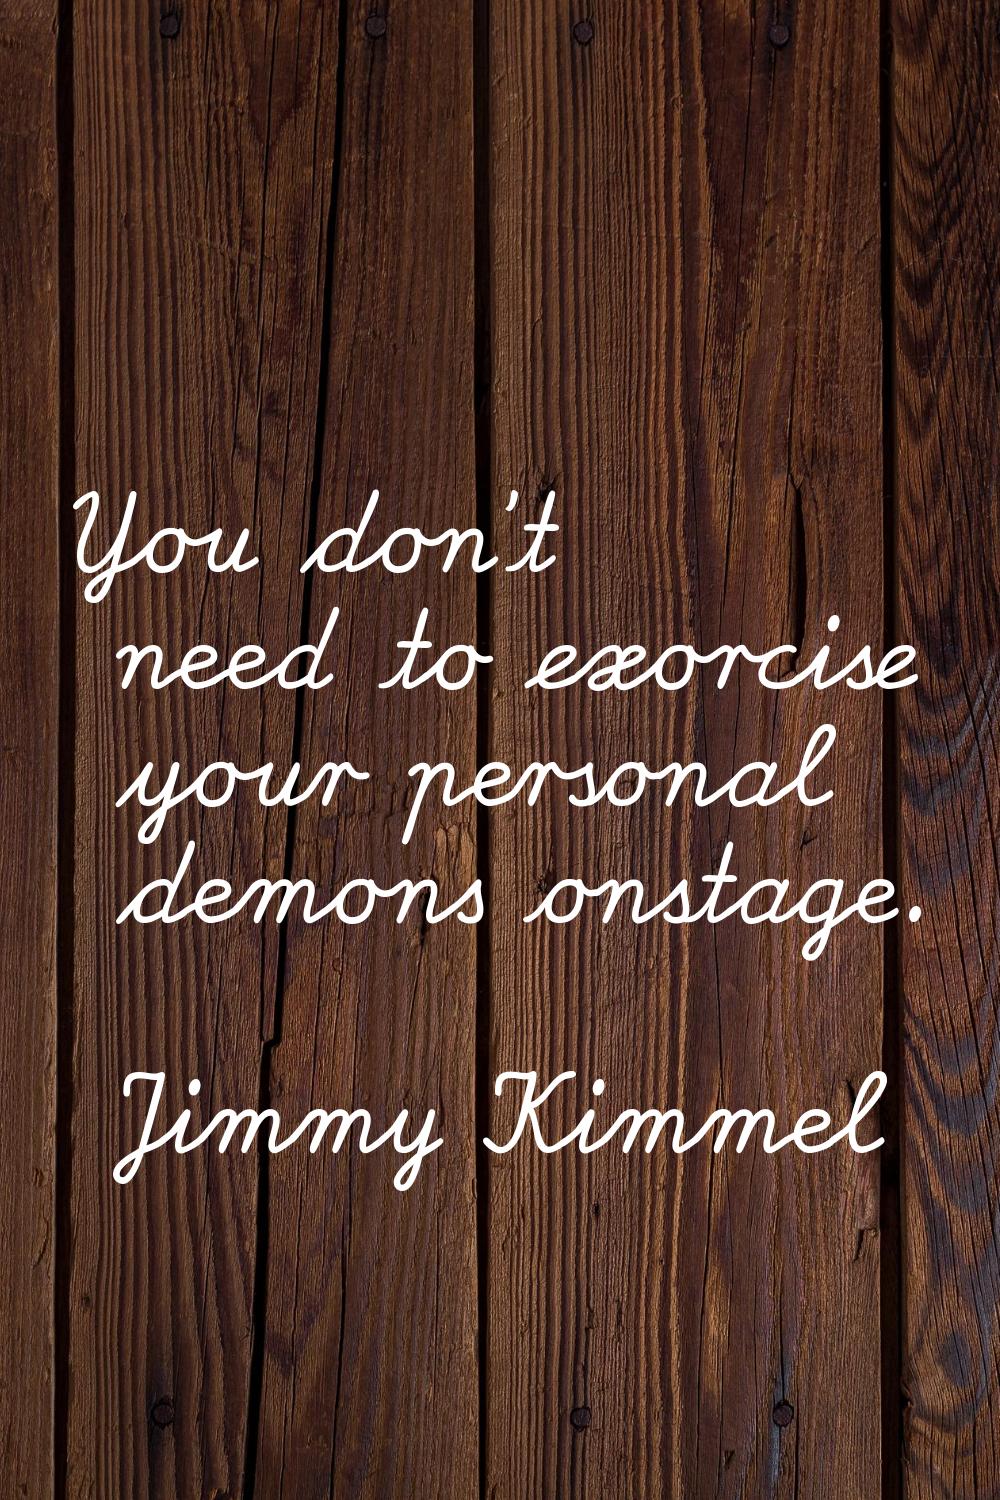 You don't need to exorcise your personal demons onstage.